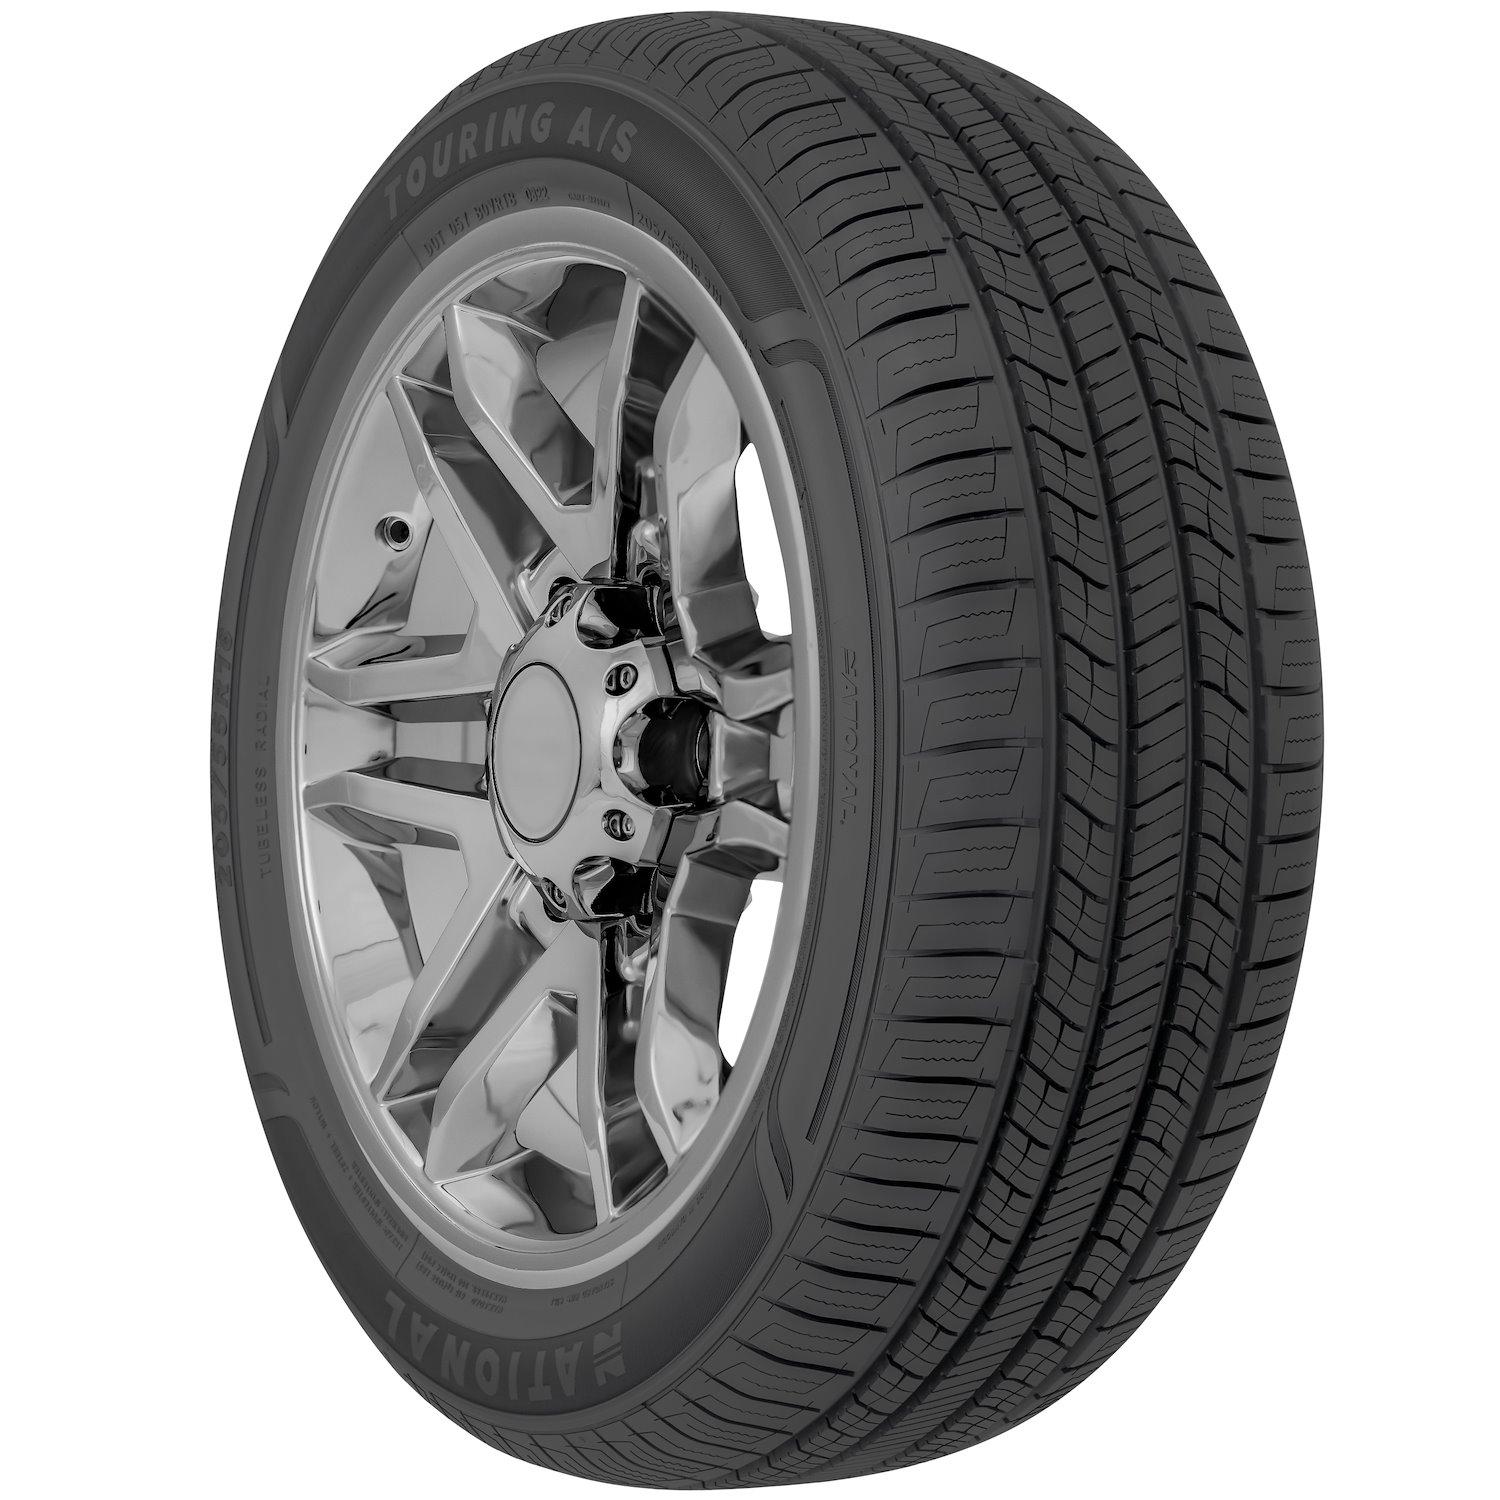 NLR41 Touring A/S Tire, 195/60R15